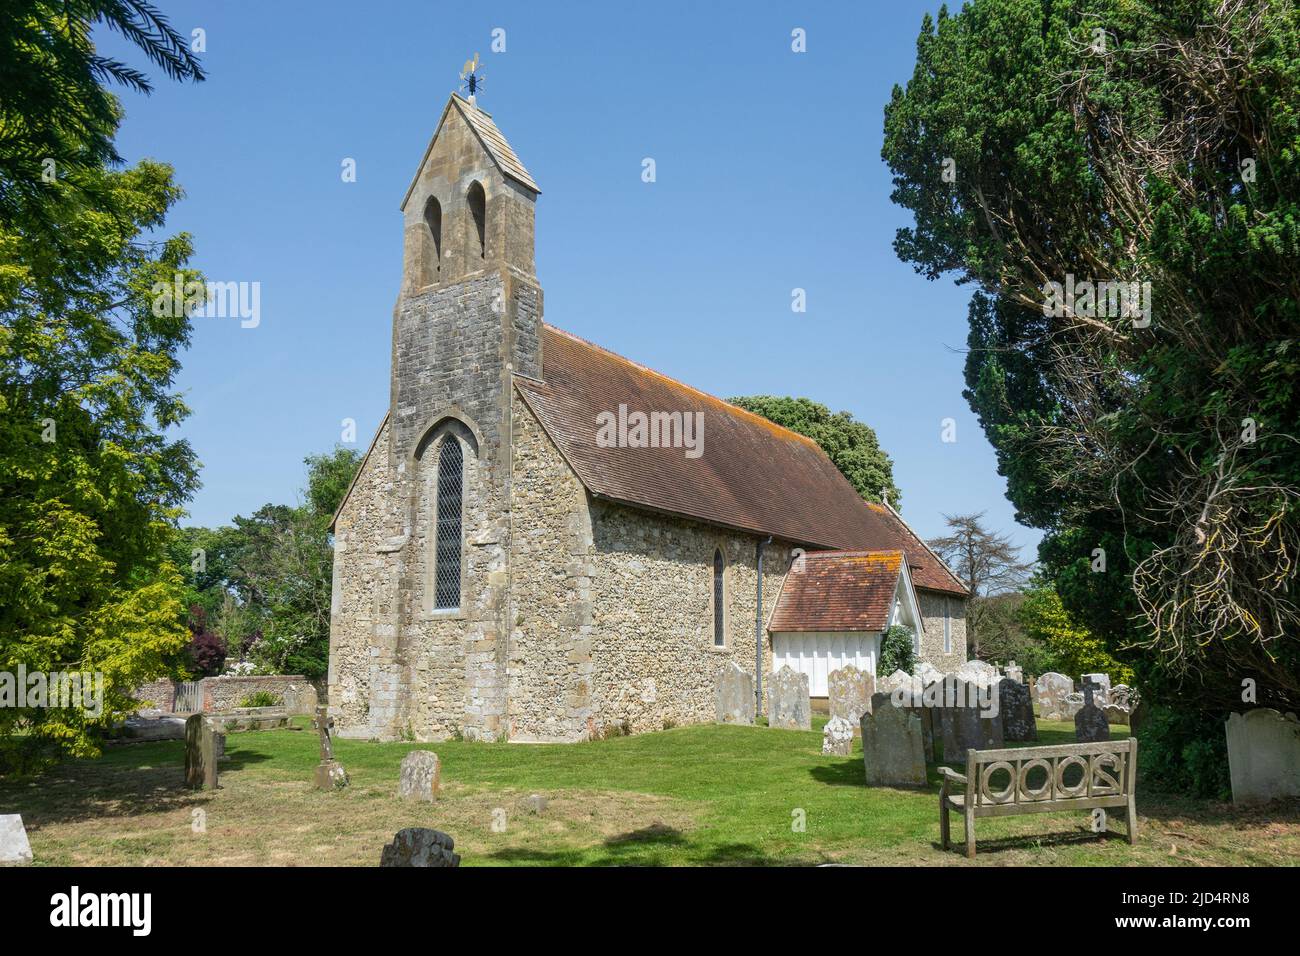 England, West Susses, Chidham church Stock Photo